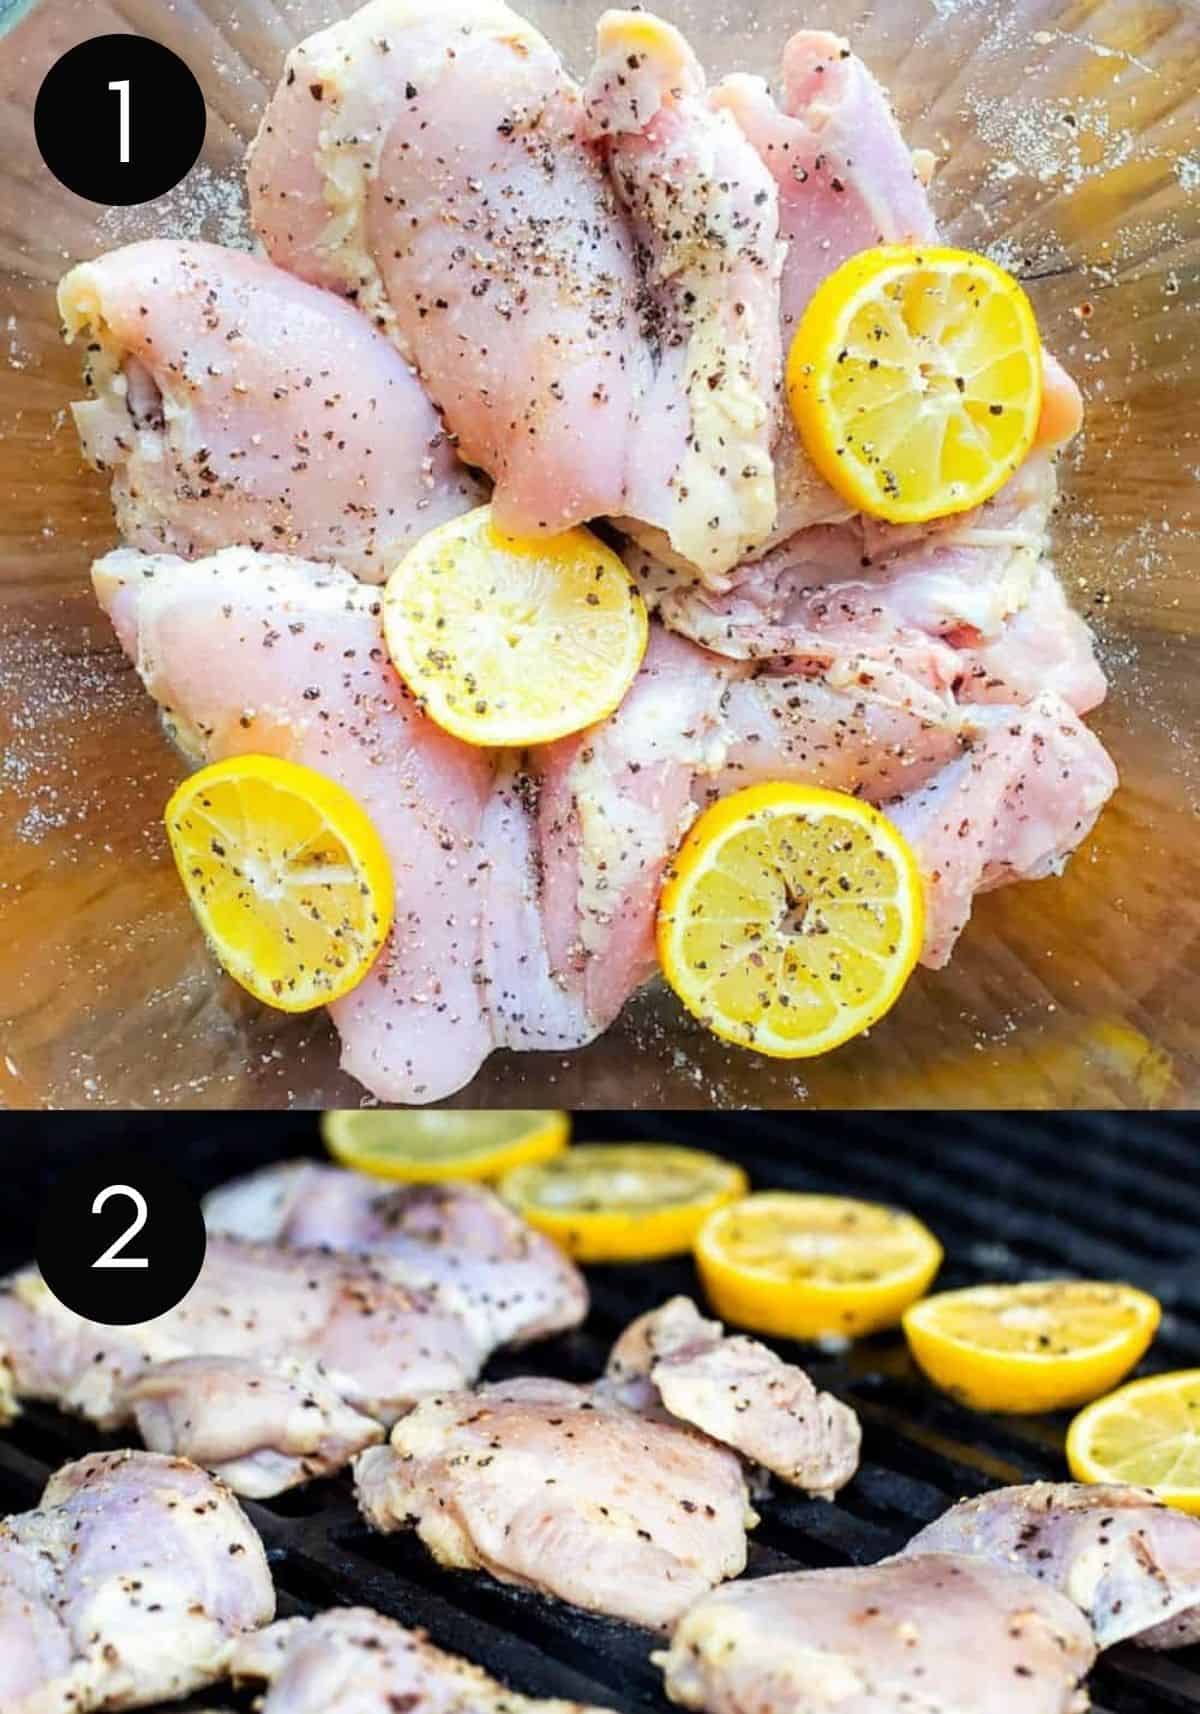 Prep image showing two photos on chicken marinating then on a grill outside.